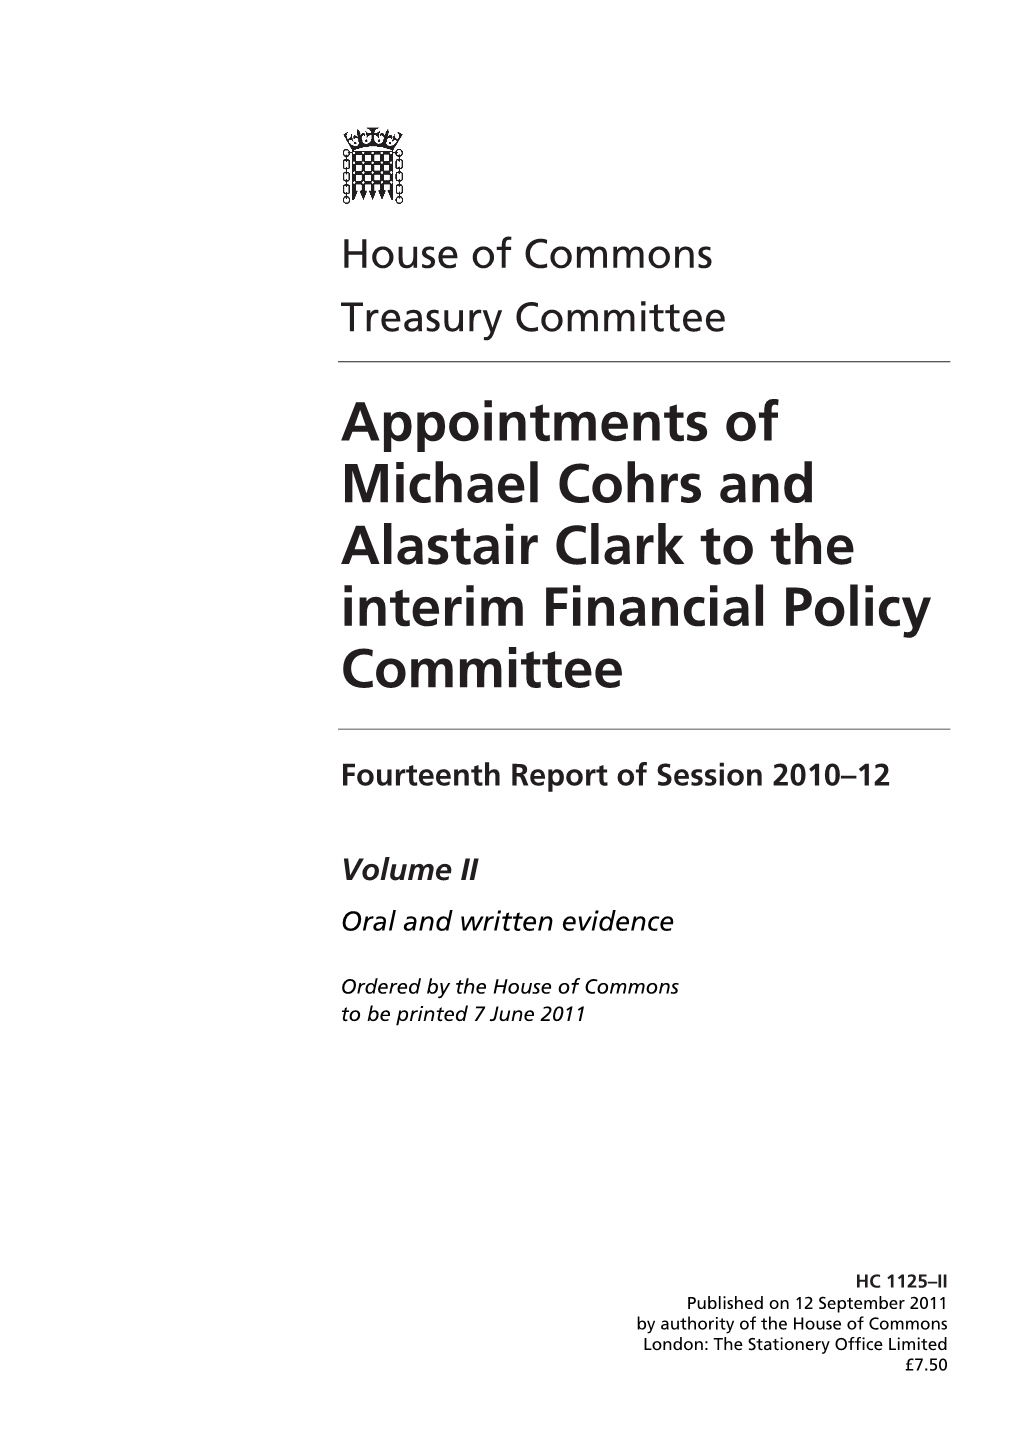 Appointments of Michael Cohrs and Alastair Clark to the Interim Financial Policy Committee